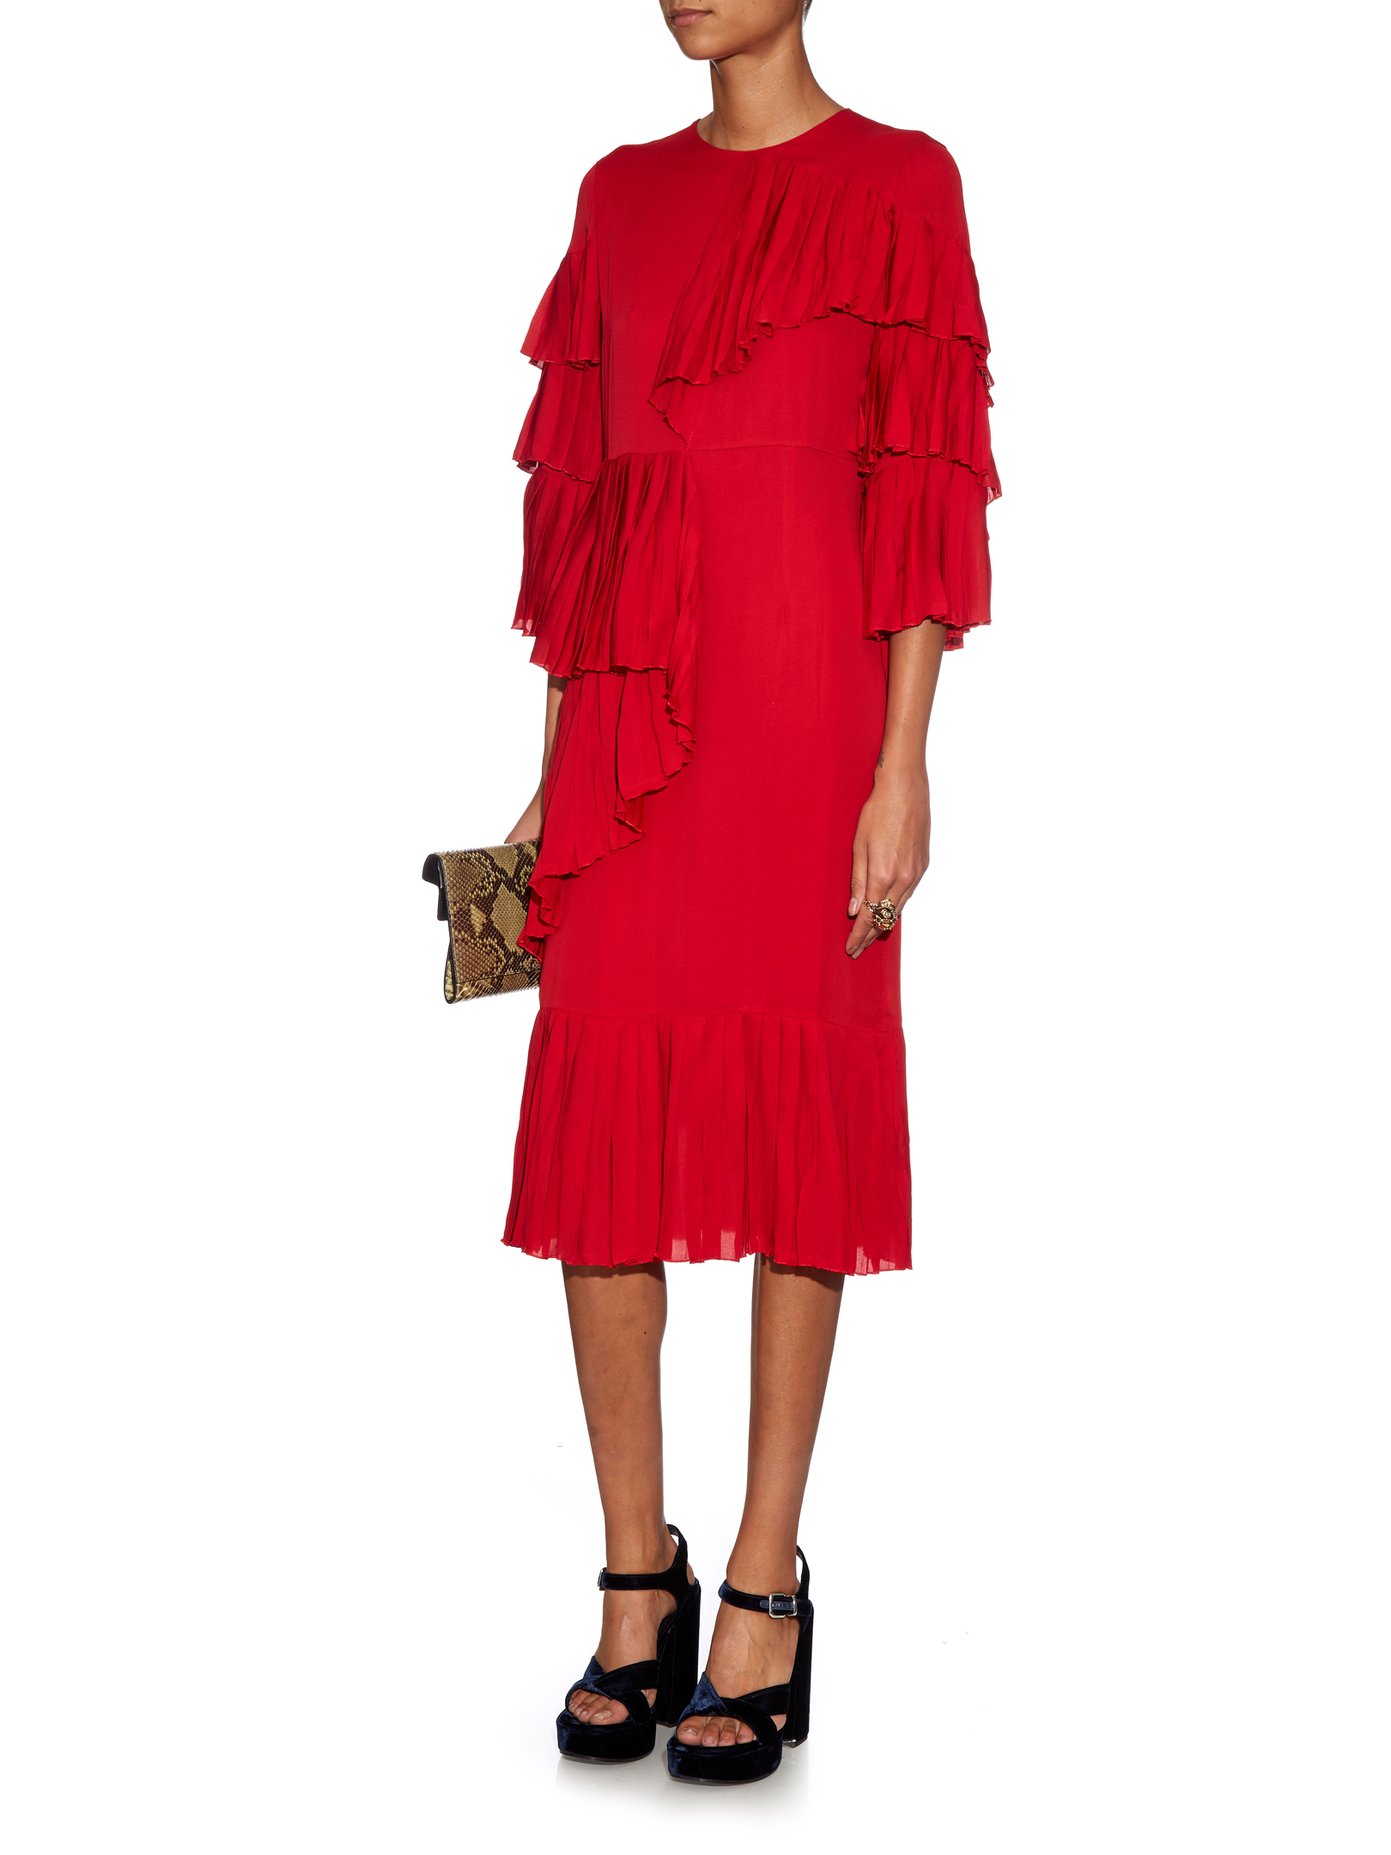 Red Ruffled Dress by Gucci